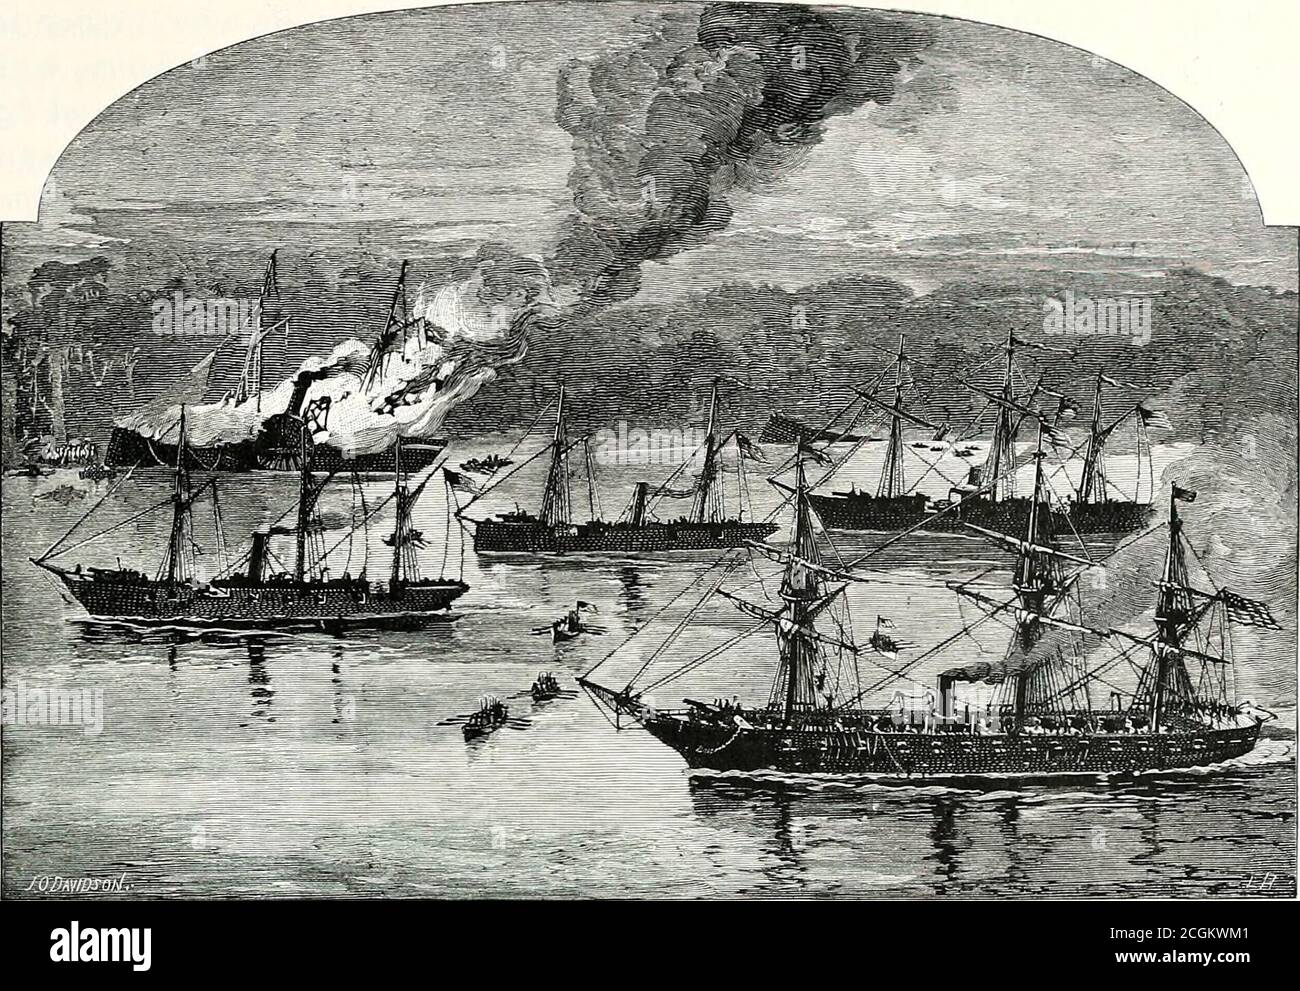 . Battles and leaders of the Civil War : being for the most part contributions by Union and Confederate officers . THE GOVERNOR MOORE, AT THE END OF THE FIGHT. FIGHTING FARRAGUT BELOW NEW ORLEANS. 87. THE GOVERNOR JIOORE IH FLAMES. The Union ships in their order, beginning with the left, are the Oneida, the Pinola, the sunken Yaruna, the Iroquois,and, in the foreground, the Pensacola. [See note concerning the Pinola and the Iroquois, p. 84.] —Editors. went to the gangway to see if any wounded had been placed in our boat,for I expected the boilers and the magazines to explode at any moment, Ifo Stock Photo